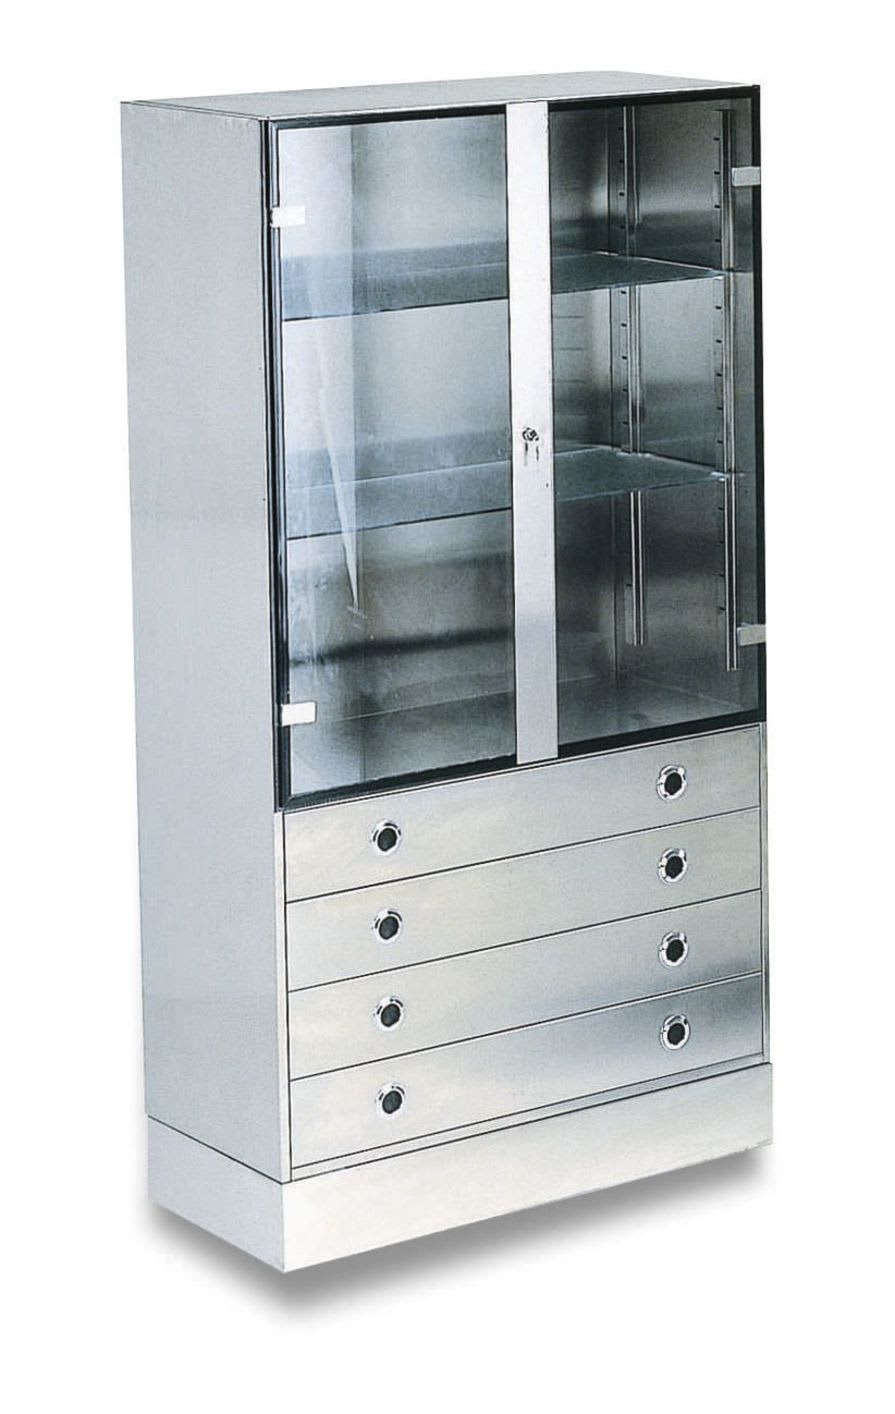 Medical cabinet / operating room / stainless steel galeno_1203-A PICOMED